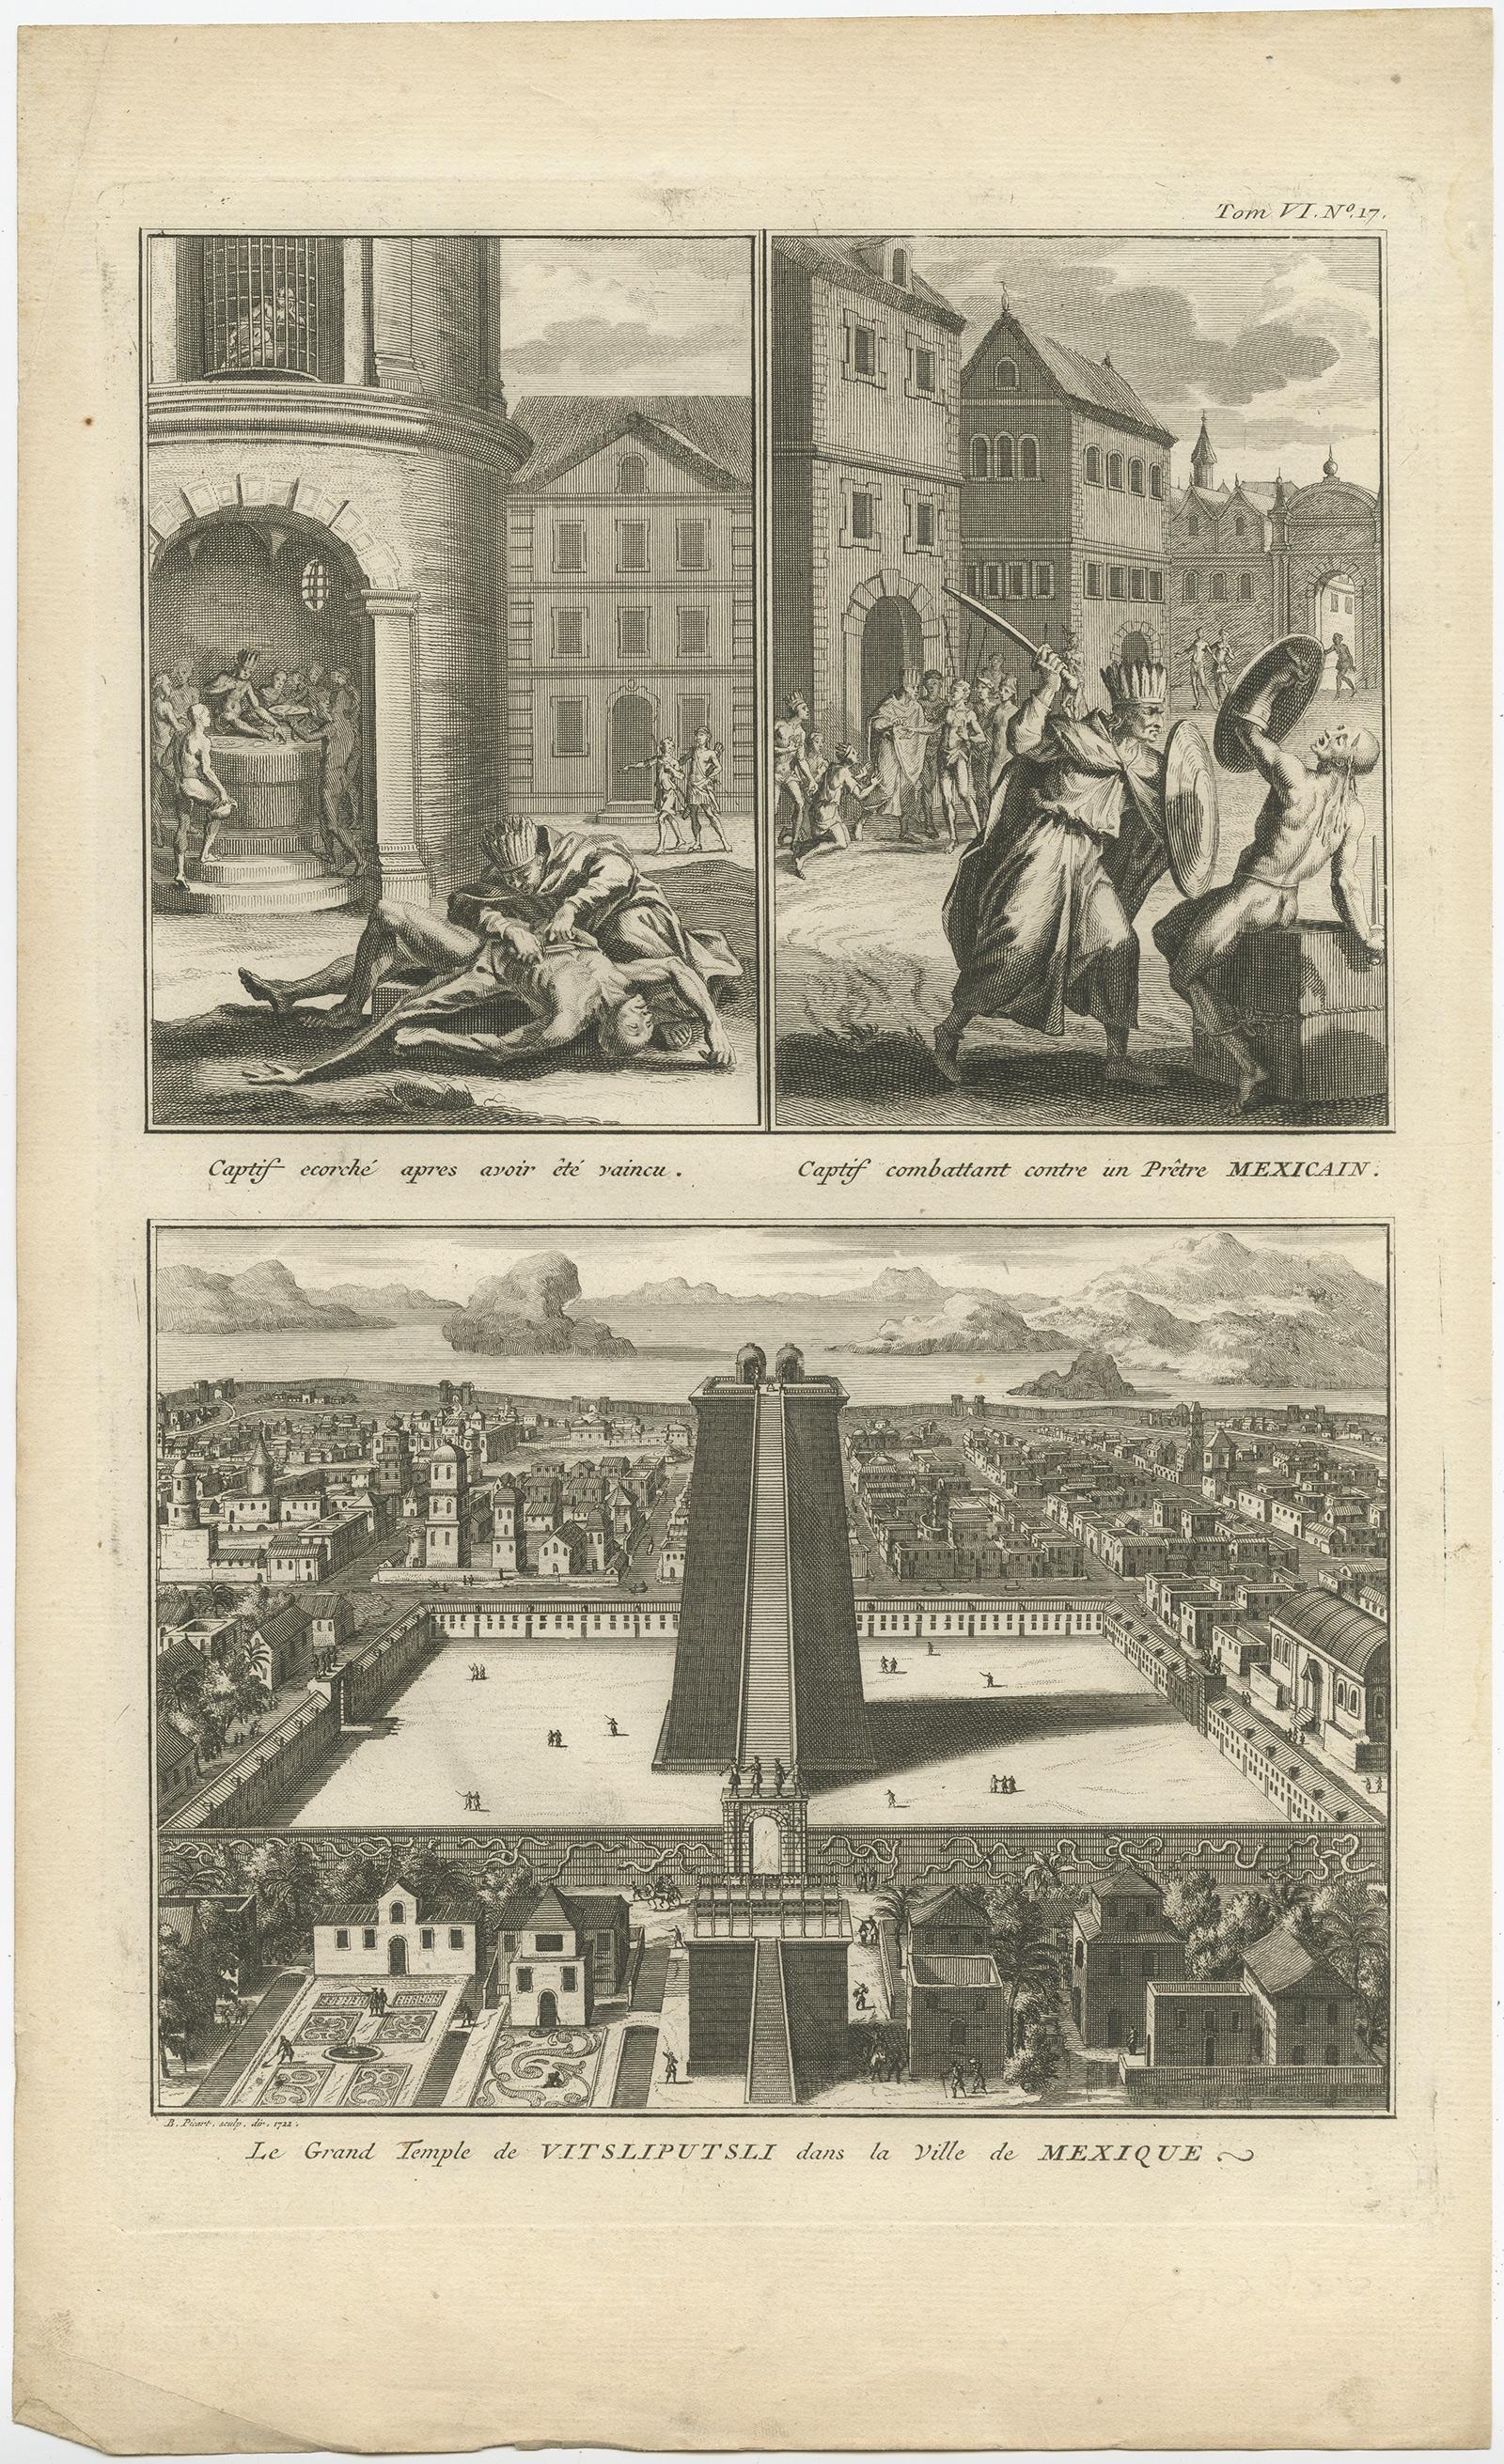 Antique print titled 'Captif ecorché apres avoir eté vaincu (..)'. Three images on one sheet. The first image shows a captive being flayed after he was killed, the second image shows a captive fighting against a Mexican priest. The third image shows